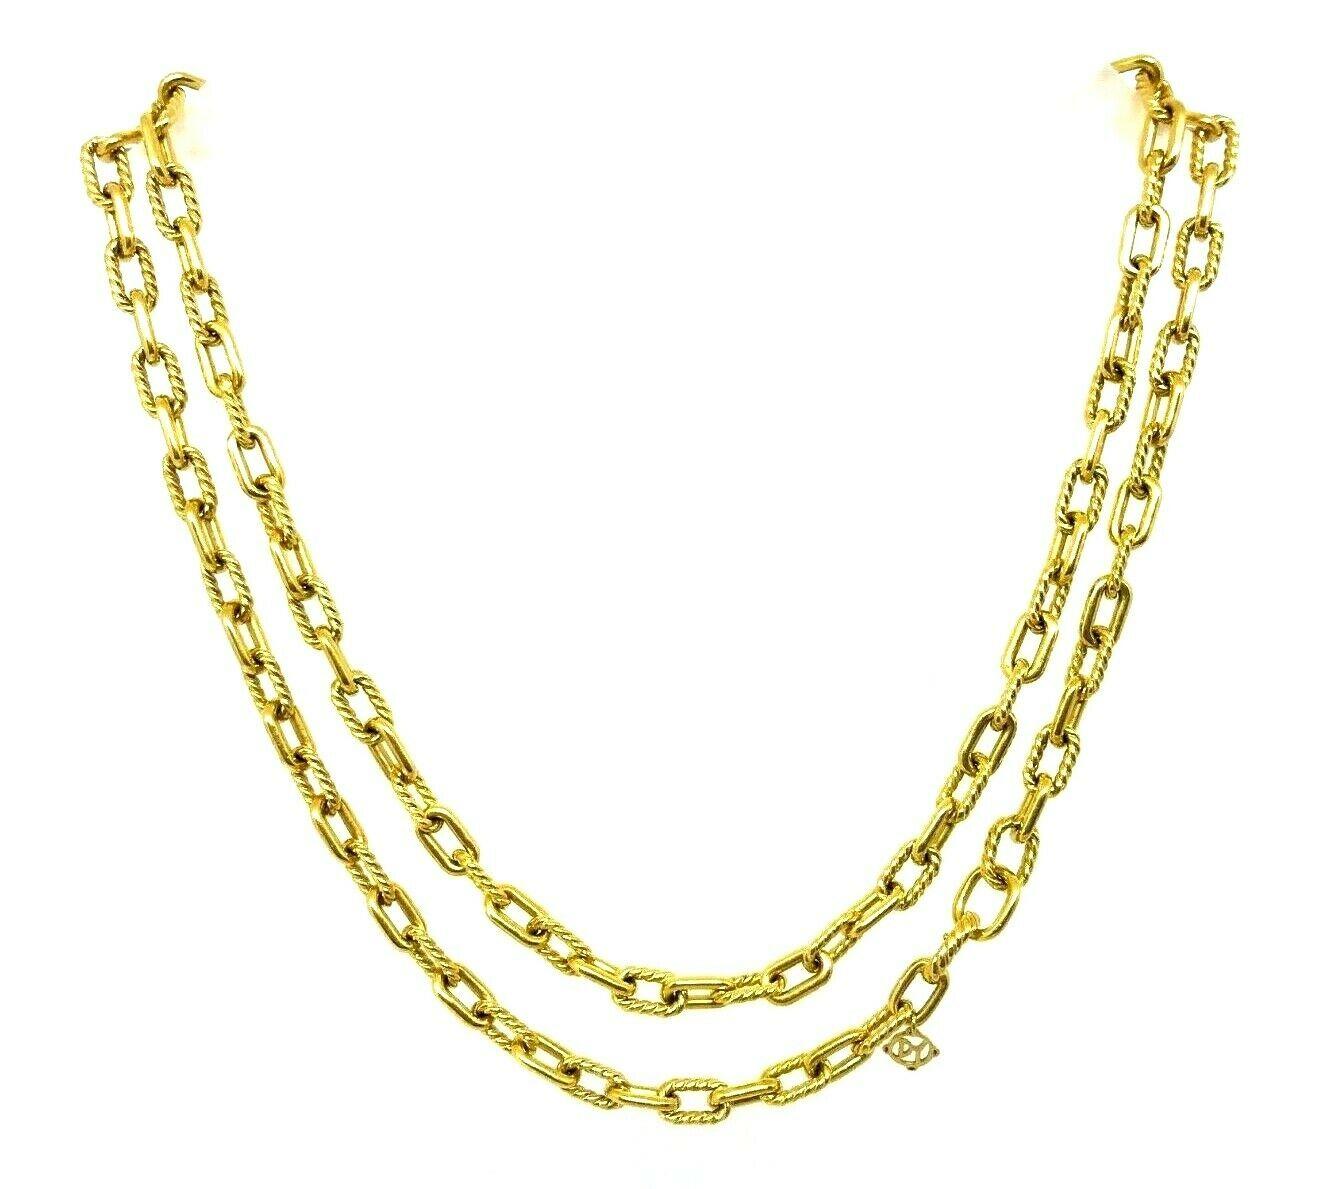 Impressive oval link chain necklace by David Yurman. Made of 18k yellow gold, 
textured and polished. Long enough to be worn as a single chain or being double wrapped around the neck. Features David Yurman maker's mark.
Measurements: 34